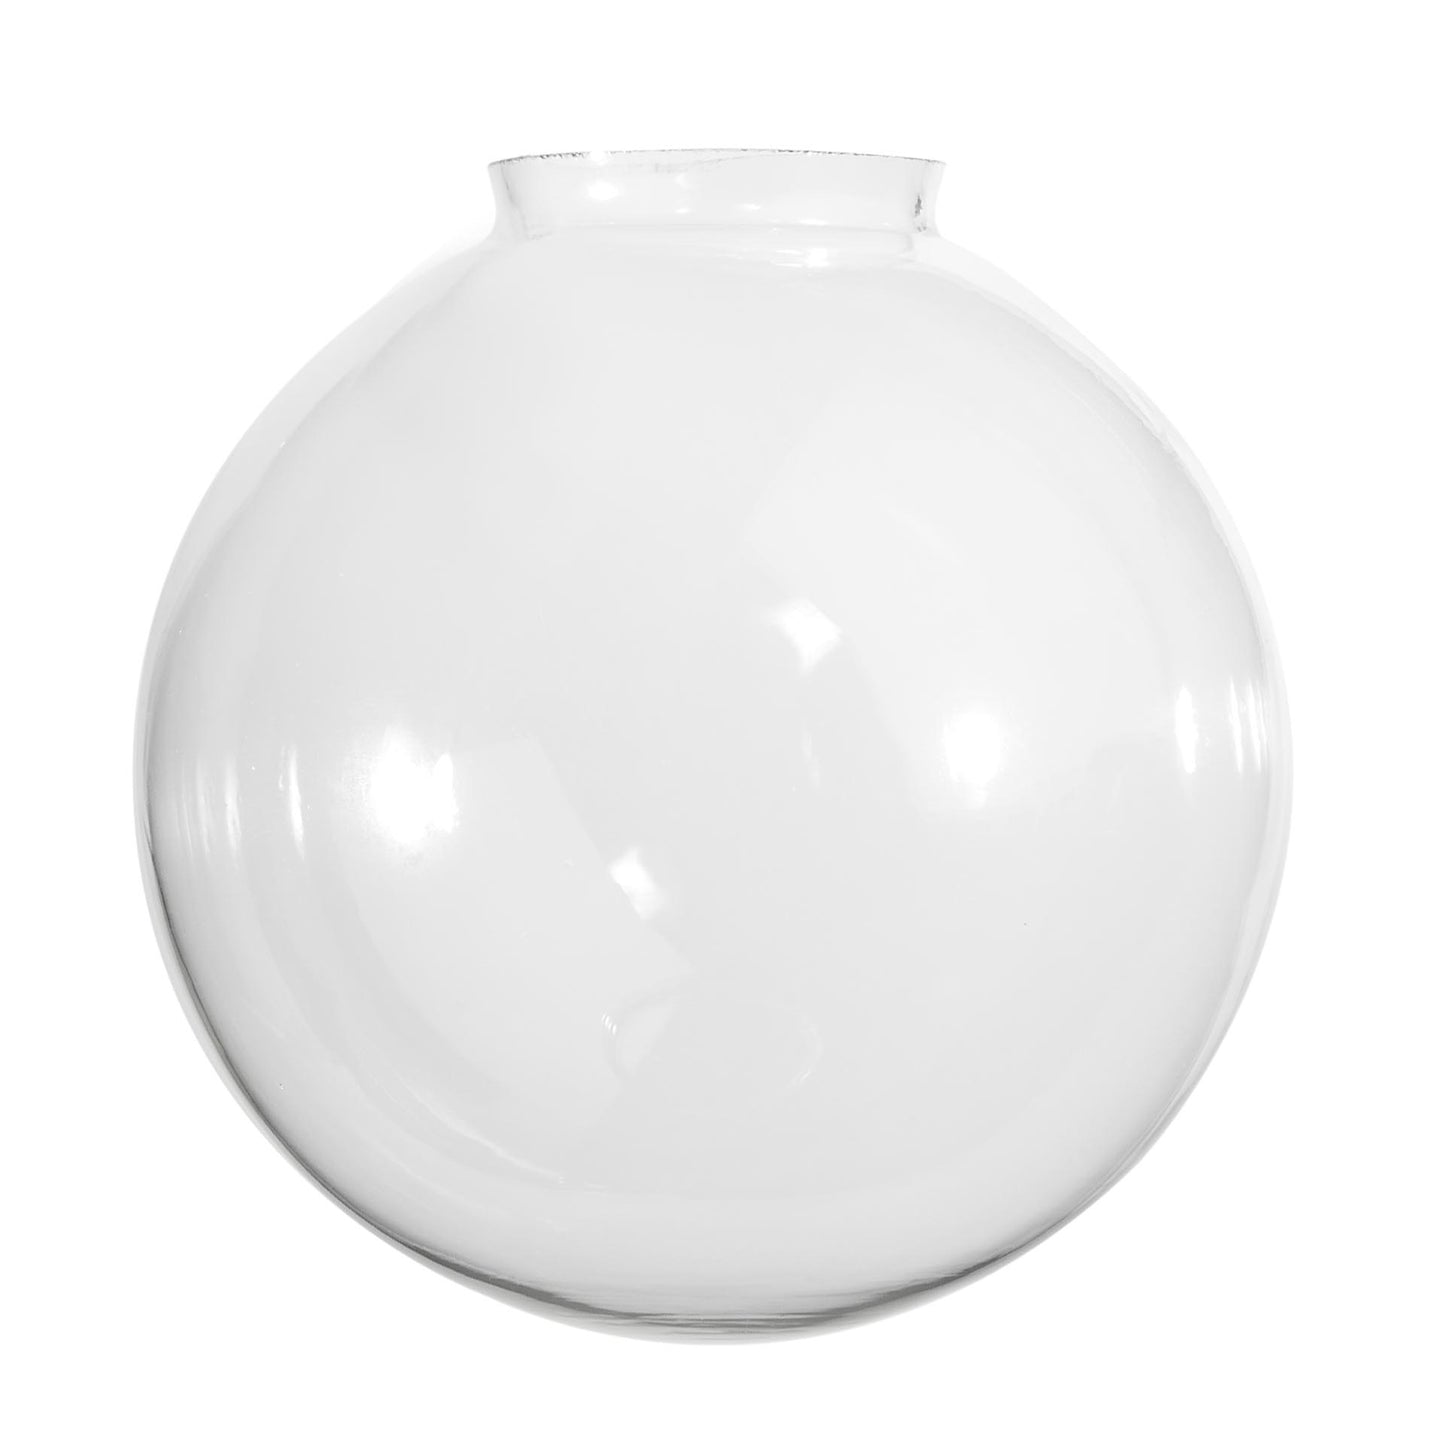 10" Dia. Clear Glass Ball Pendant Shade, 4" Fitter